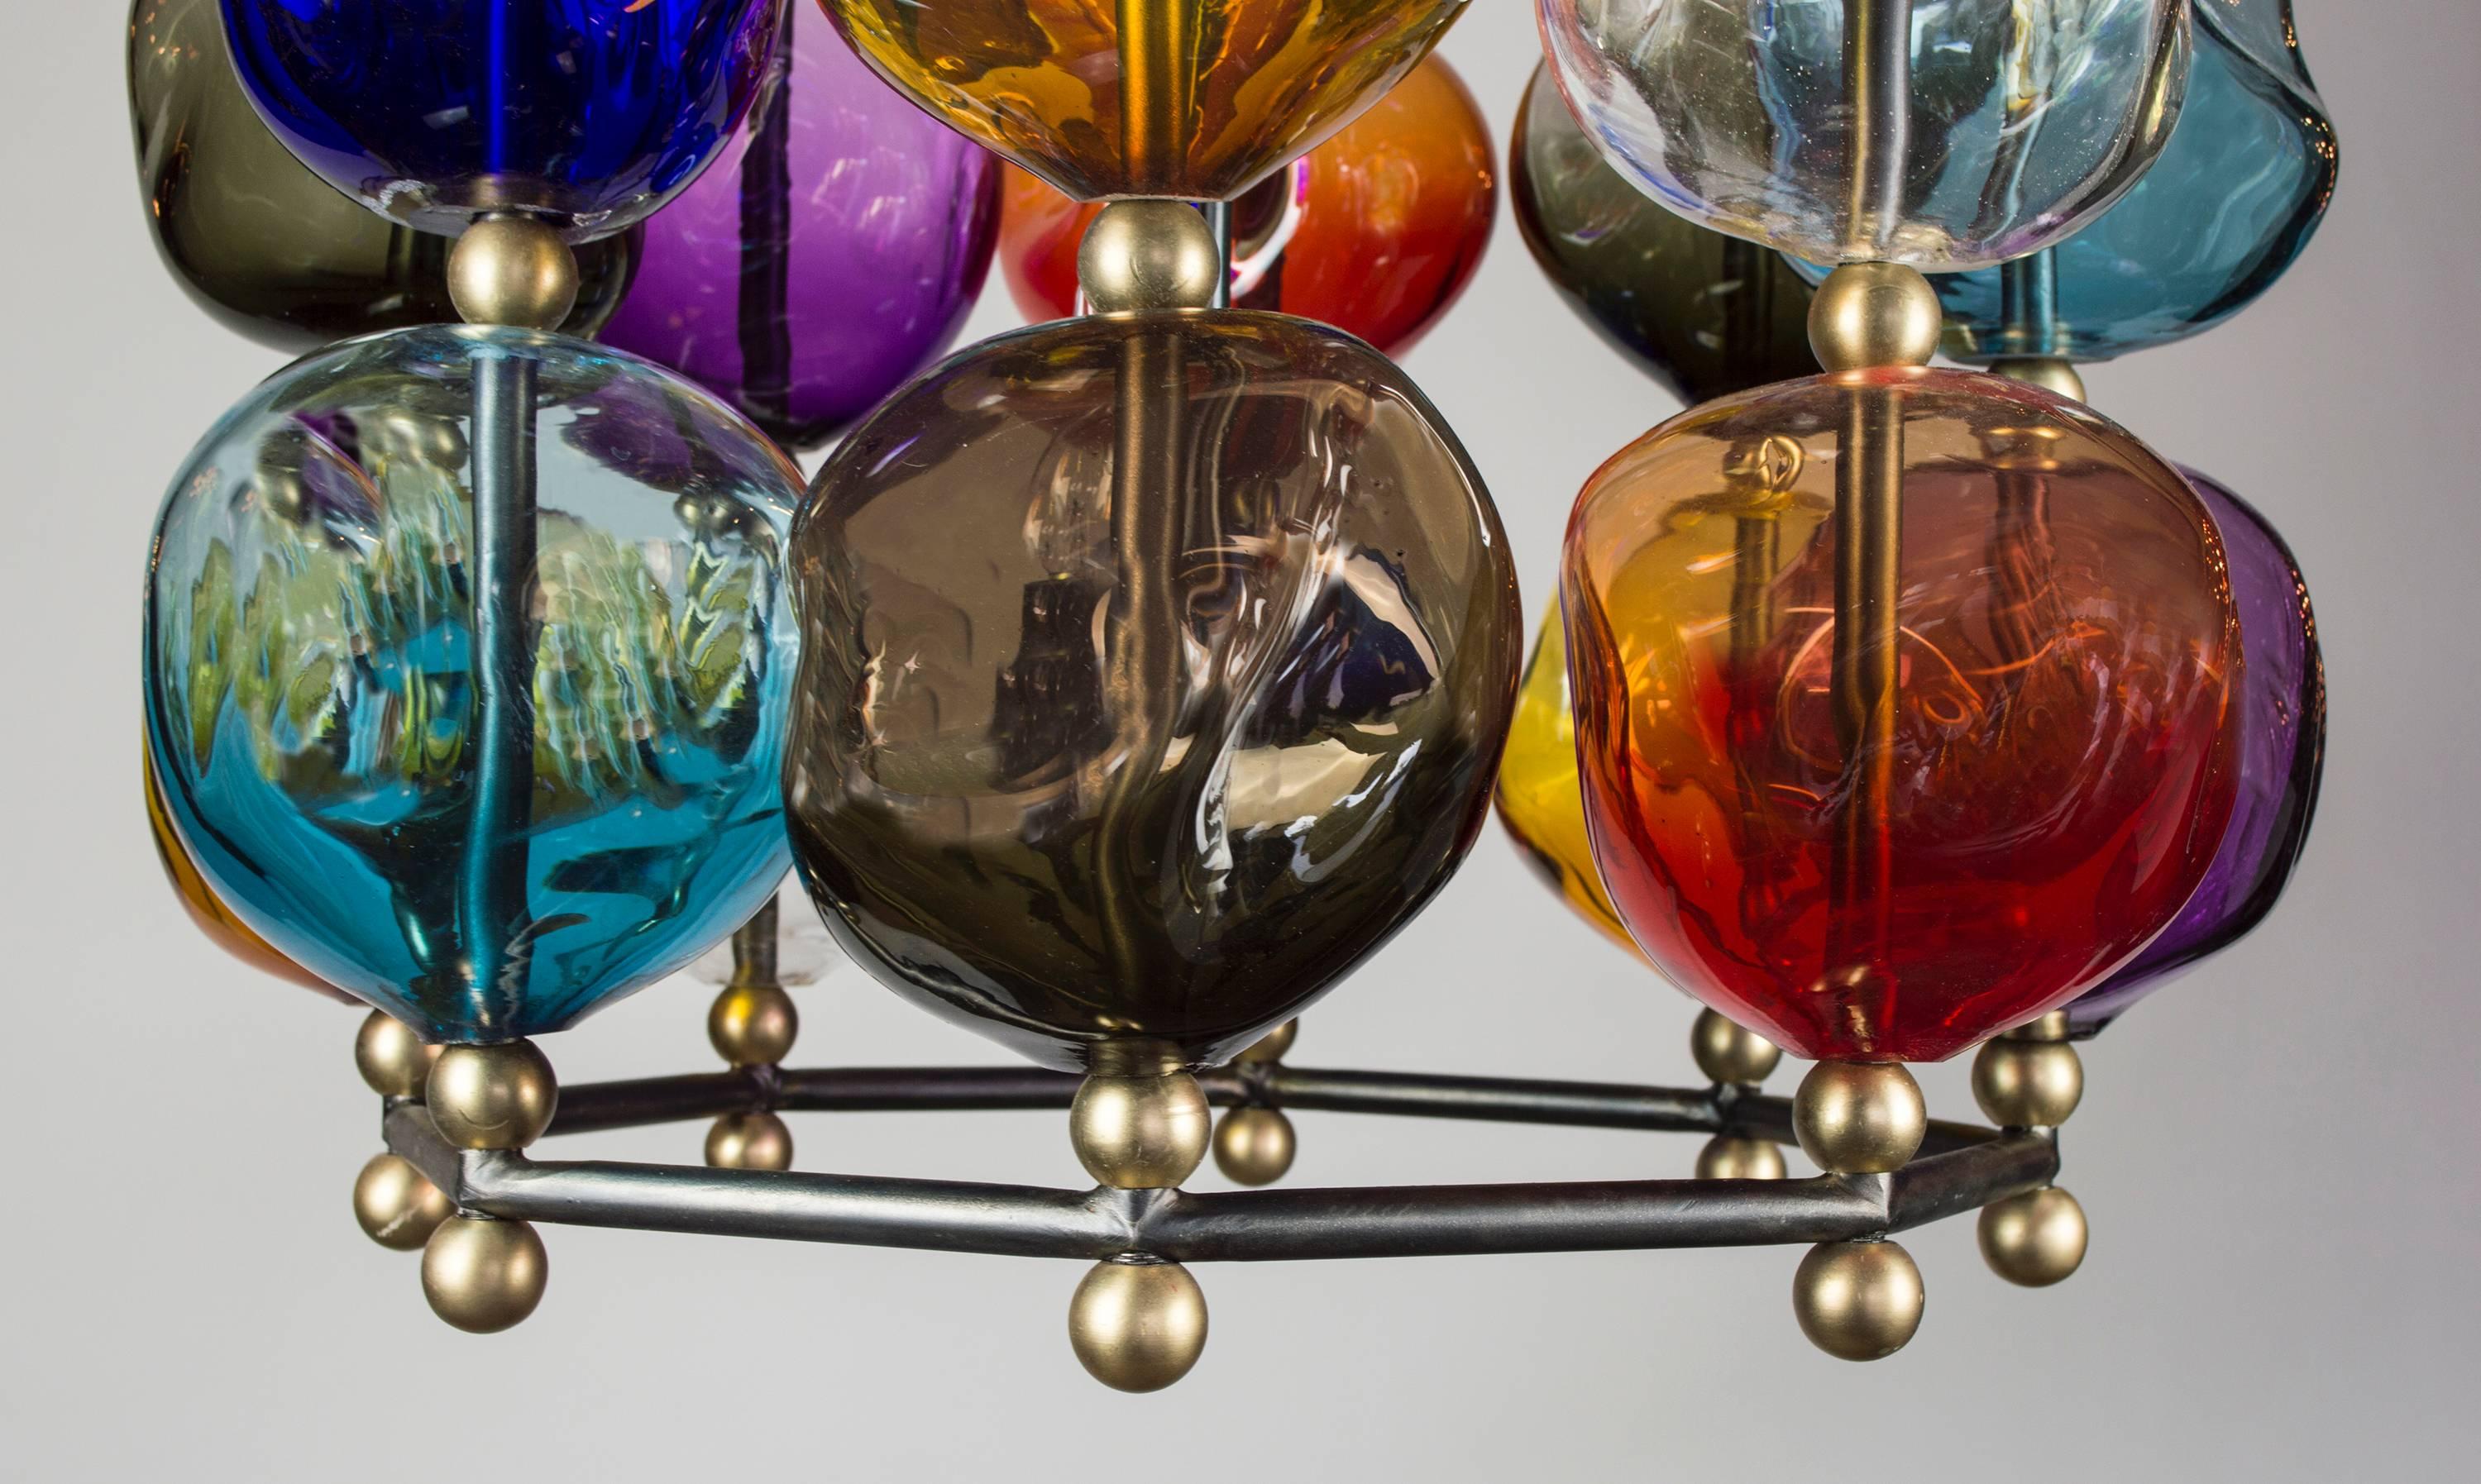 A fresh expression of the Classic lantern created to accentuate the shimmering light, which reflects in the many contours of the glass. The hand blown glass orbs with their asymmetrical shapes are assembled on an octagonal gunmetal steel frame